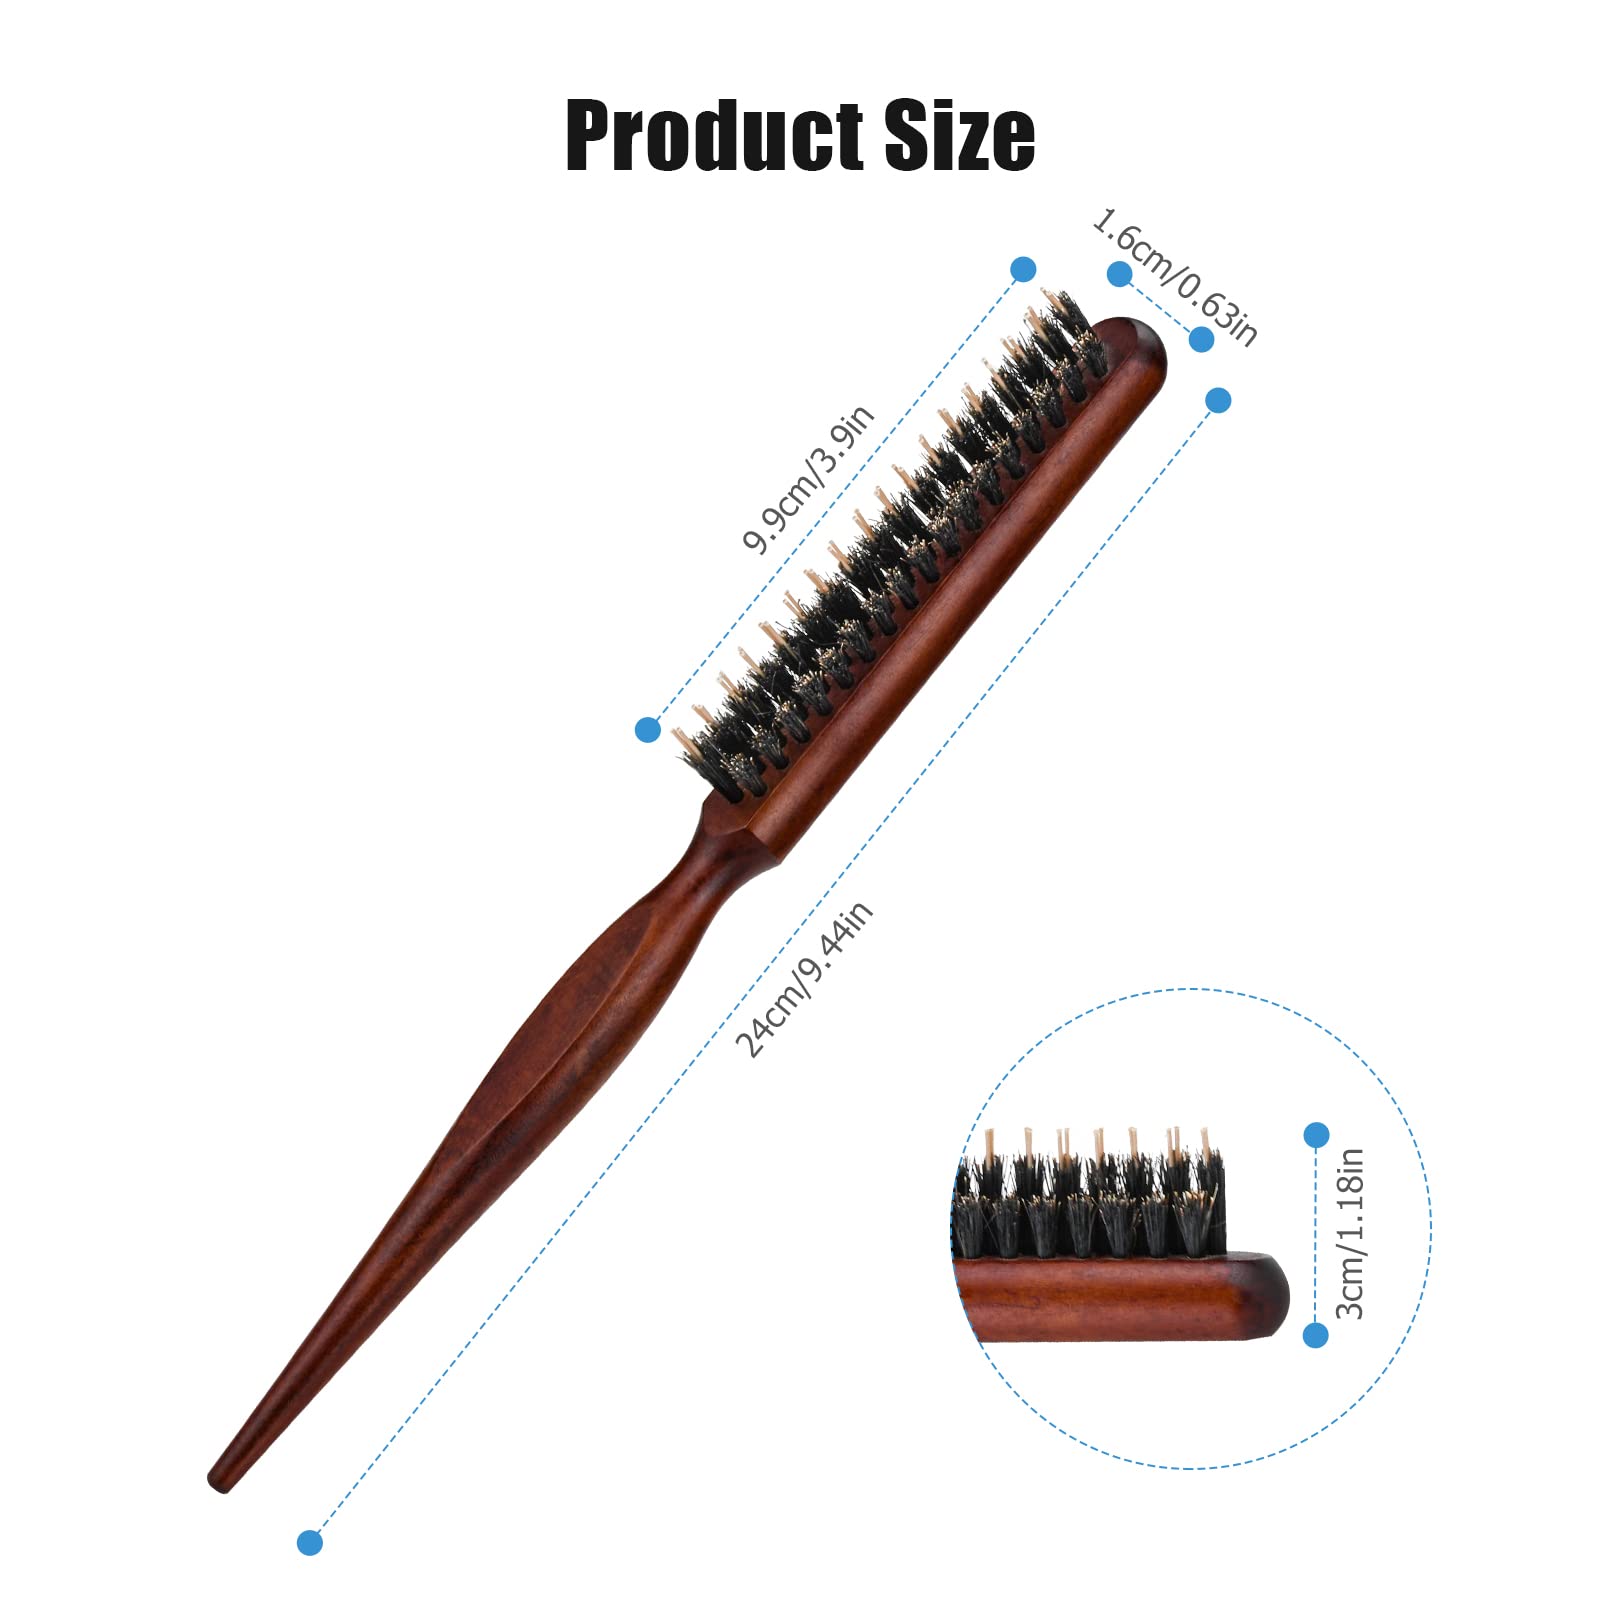 Teasing Brush, Nylon Boar Bristle Curl Training Teasing Hair Brush for Women with Rat Tail Handle Comb for Thin Thick Hair to Create Volume and Smooth